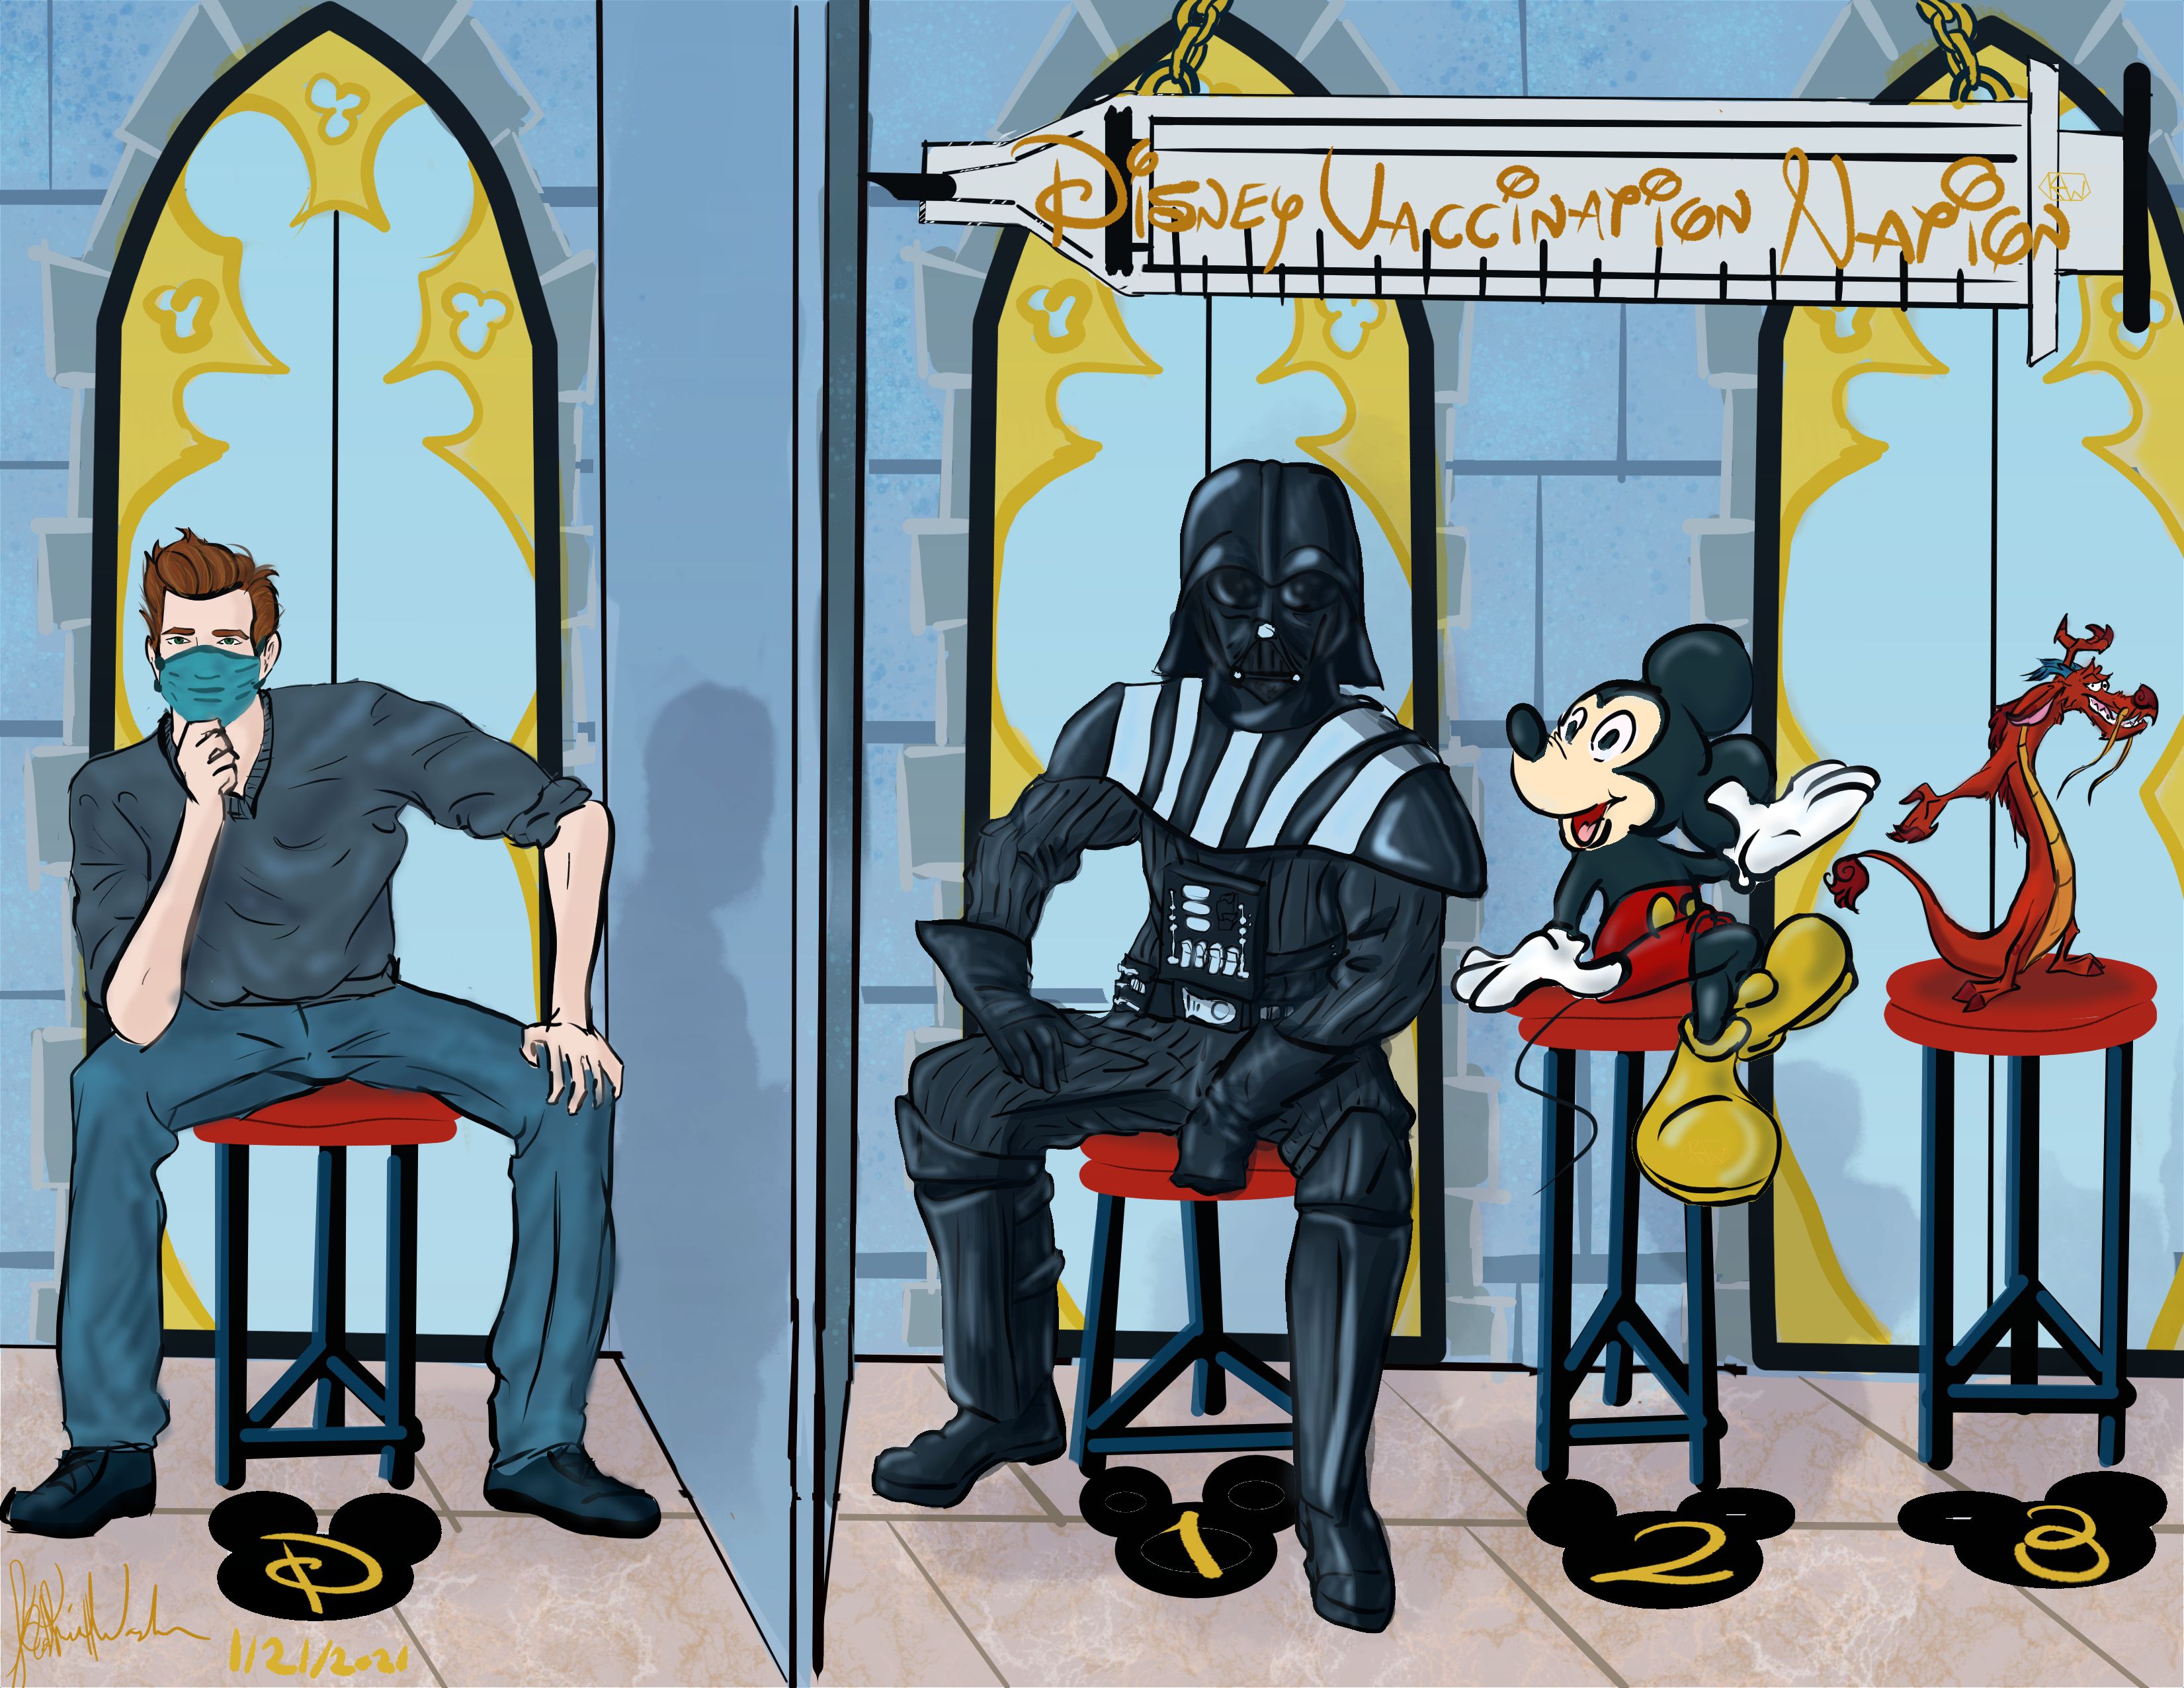 Comic of patient choosing which Disney character to give him the COVID-19 vaccine at Disney's new vaccination station.